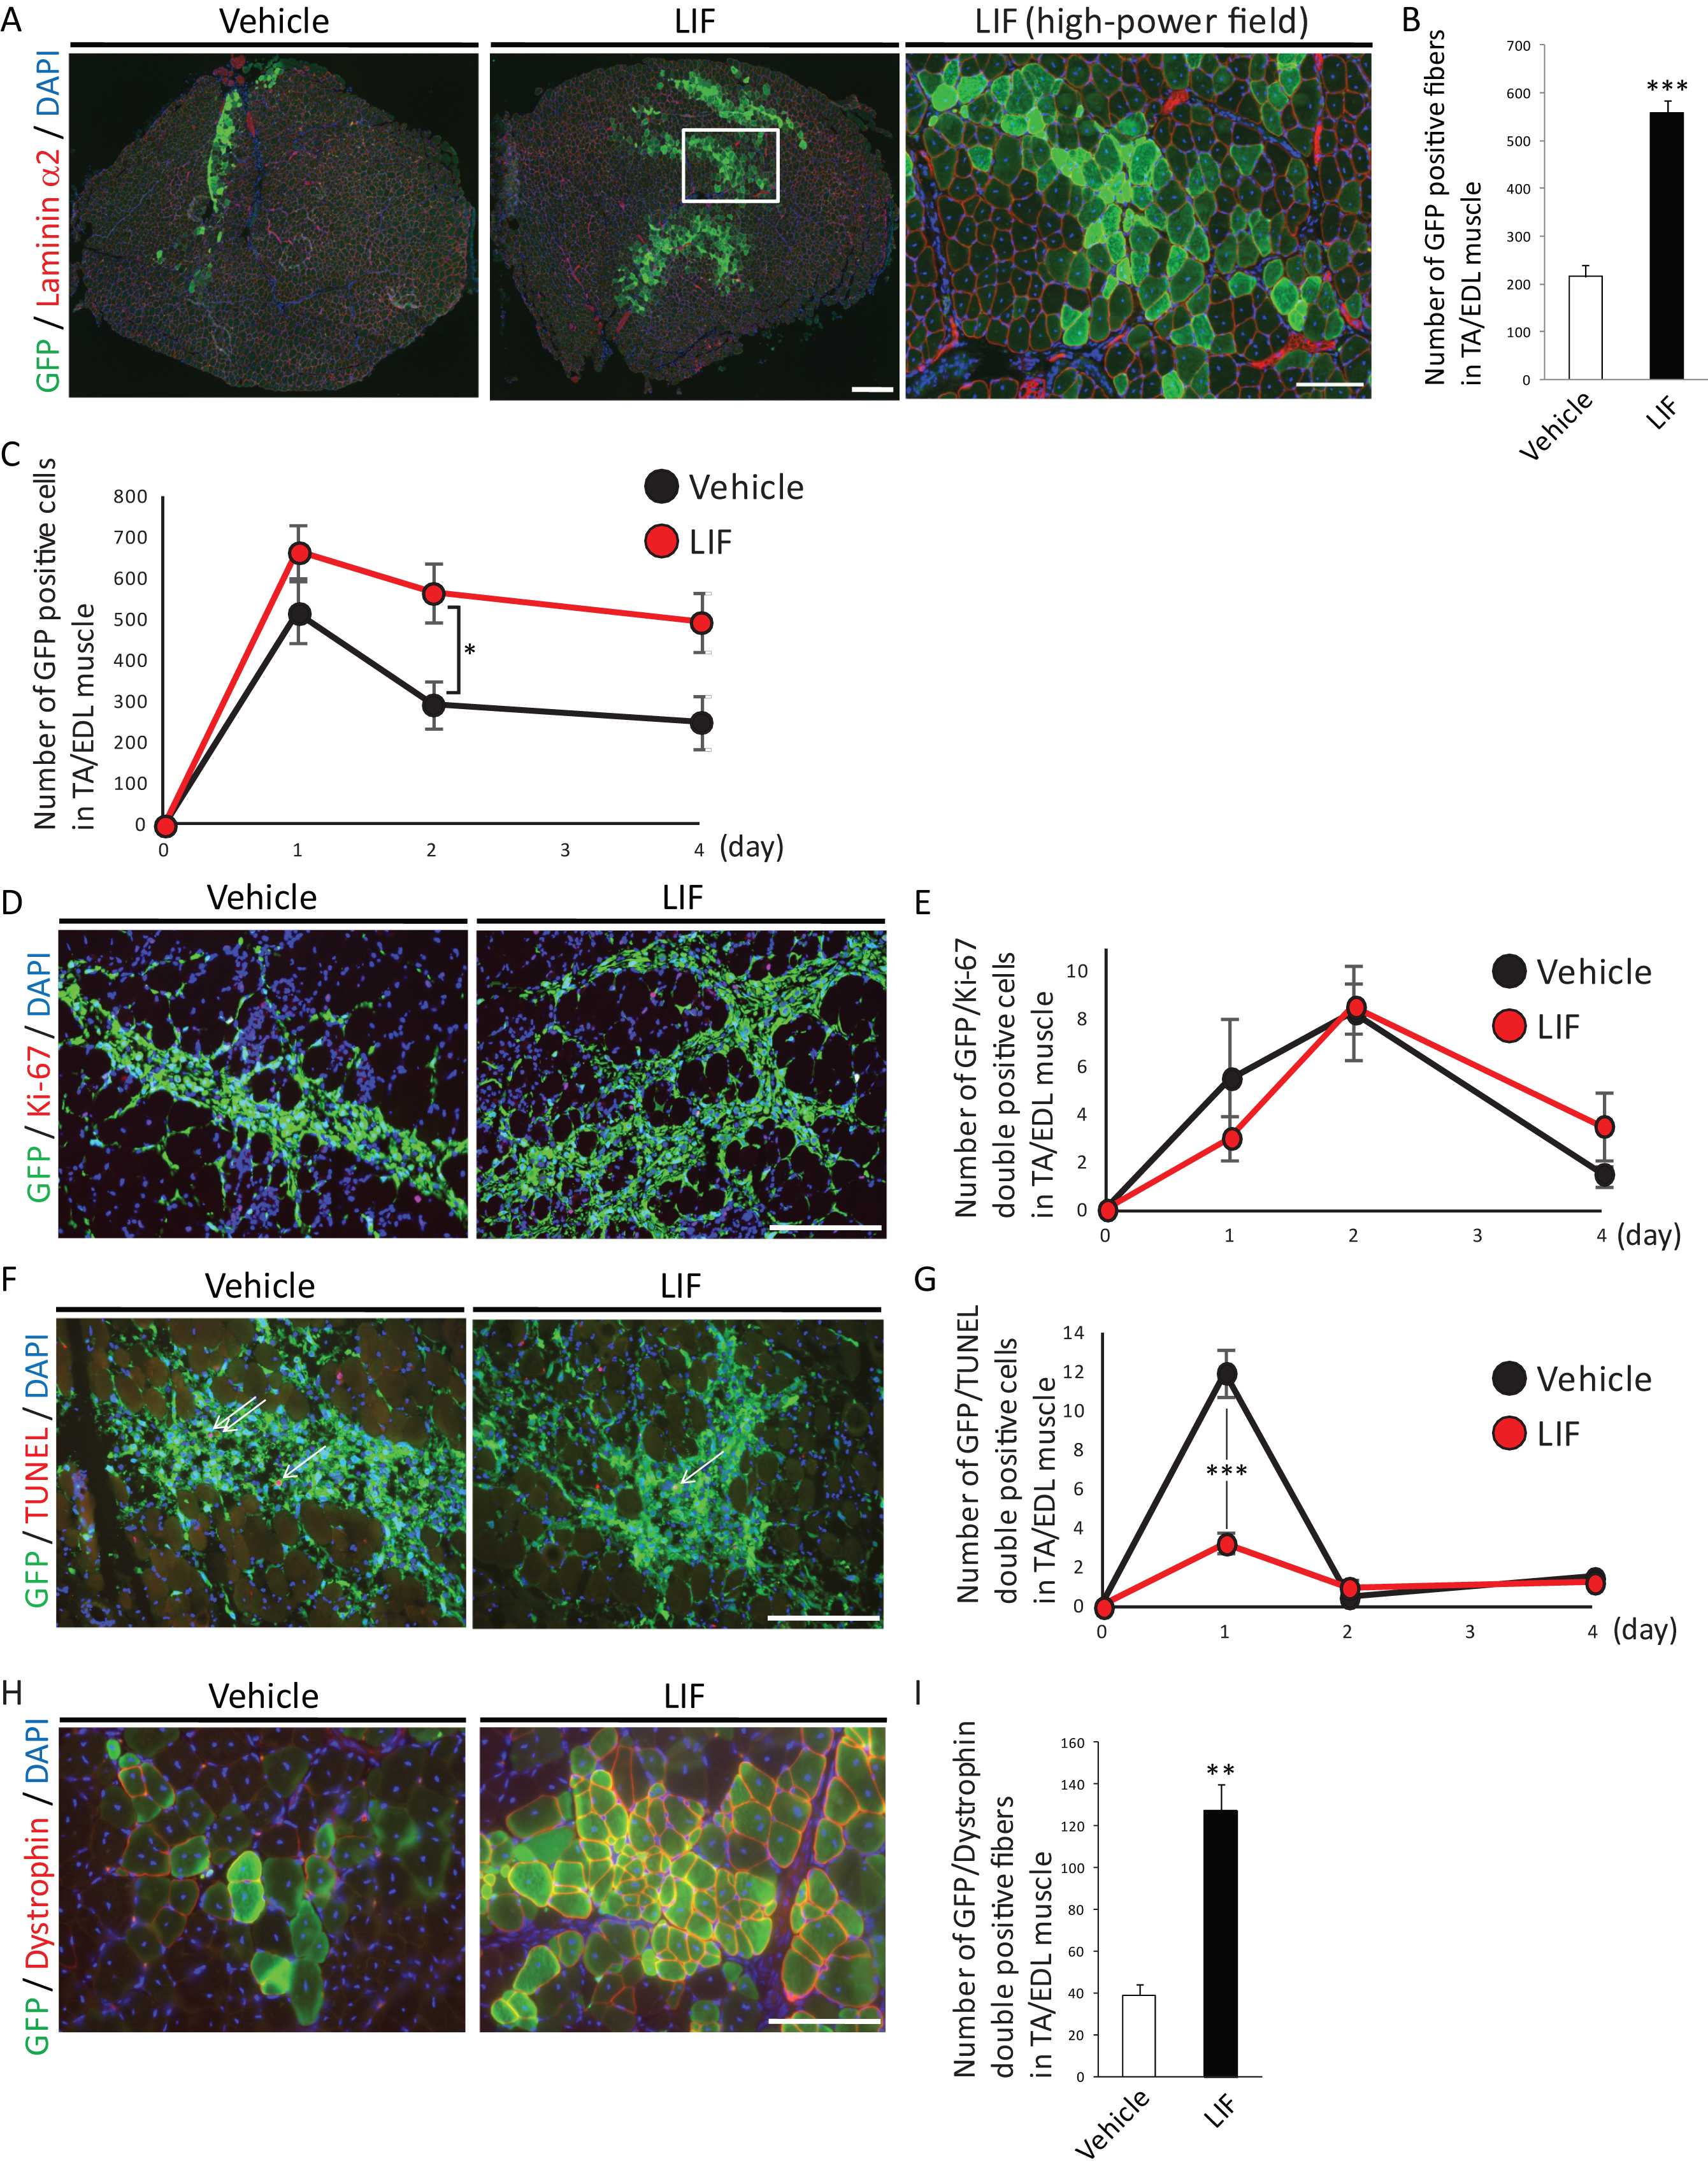 LIF enhances transplantation efficiency of satellite cells. A) Representative immunohistochemistry of GFP-positive fibers in transplanted muscles at 2 weeks after transplantation. Low-power field images were shown in left and center. Scale bar: 300 μm. High-power field image was shown in right. Scale bar: 100 μm. Right image was identical to the boxed area in center image. B) Quantitative analysis for the number of GFP-positive fibers surrounded by laminin α2 at 2 weeks after transplantation. n = 5. C) Quantitative analysis for the number of GFP-positive cells at 1, 2 or 4 days after transplantation. D) Representative immunohistochemistry of GFP/Ki-67-double positive cells in transplanted muscles at 2 days after transplantation. Scale bar: 100 μm. E) Quantitative analysis for the number of GFP/Ki-67-double positive cells. n = 4. F) Representative immunohistochemistry of GFP/TUNEL-double positive cells in transplanted cells at 1 day after transplantation. Arrows indicated GFP/TUNEL-double positive cells. Scale bar: 100 μm. G) Quantitative analysis for the number of GFP/TUNEL-double positive cells. n = 4. H) Representative immunohistochemistry of GFP/Dystrophin-double positive fibers in transplanted muscles. Scale bar: 100 μm. I) Quantitative analysis for the number of GFP/Dystrophin-double positive fibers. n = 4. All GFP-positive, GFP/Ki-67-double positive, GFP/TUNEL-double positive or GFP/Dystrophin-double positive cells or fibers in TA/EDL muscles were counted. **P < 0.01 ***P < 0.001 by Student’s t-tests. Error bars indicate standard error of mean.